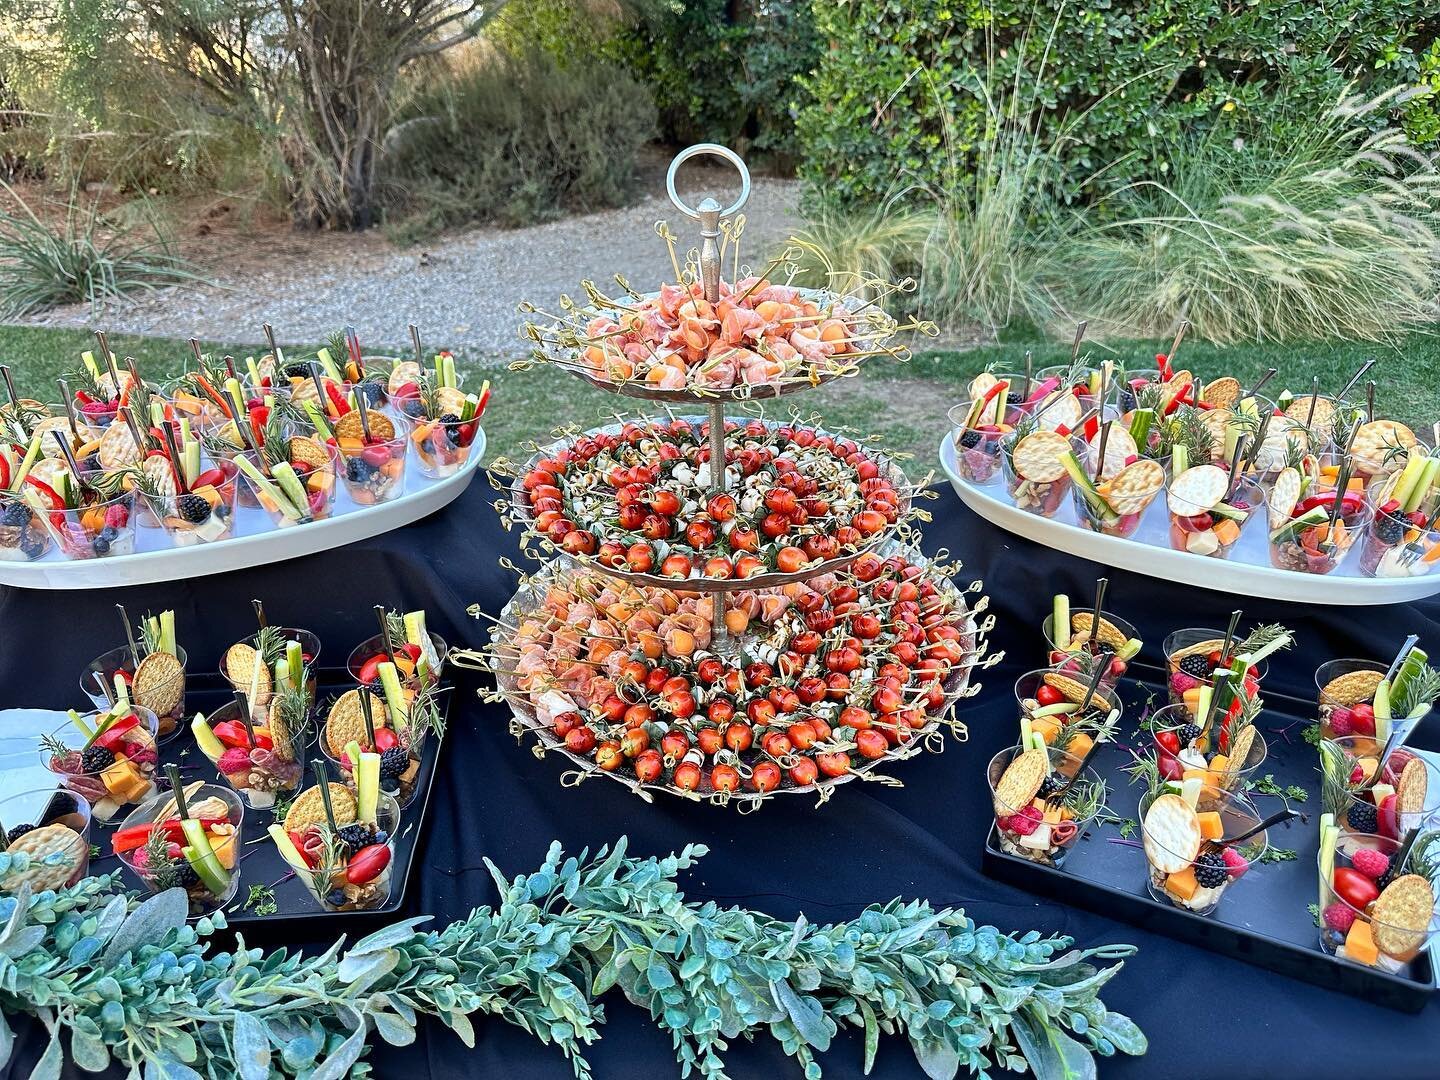 Sweet 16 event at #blomgrenranch this past weekend. Such a beautiful event! Swipe left for more pics and vid&rsquo;s. #catering #cheflife #caterer #santaclaritacatering #instafood